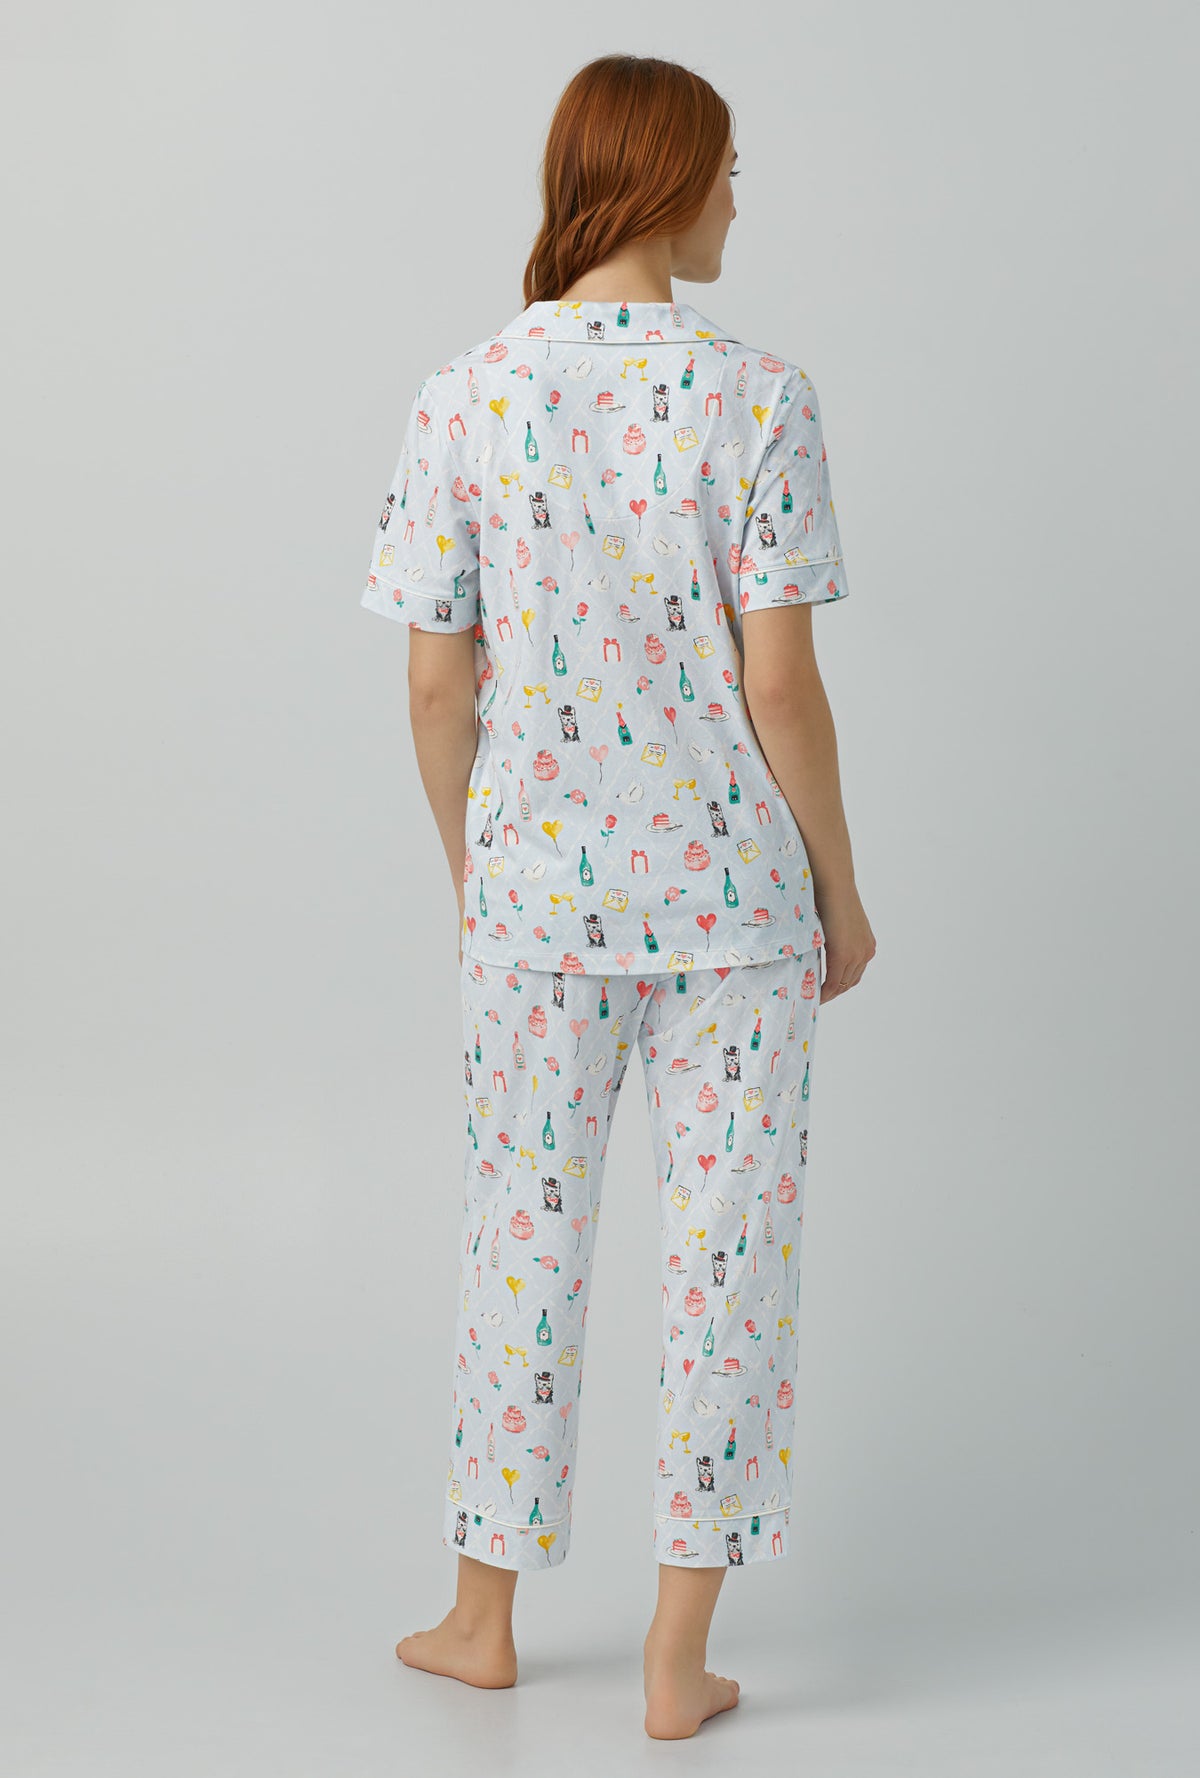 A lady wearing Short Sleeve Classic Stretch Jersey Cropped PJ Set with wedding party print